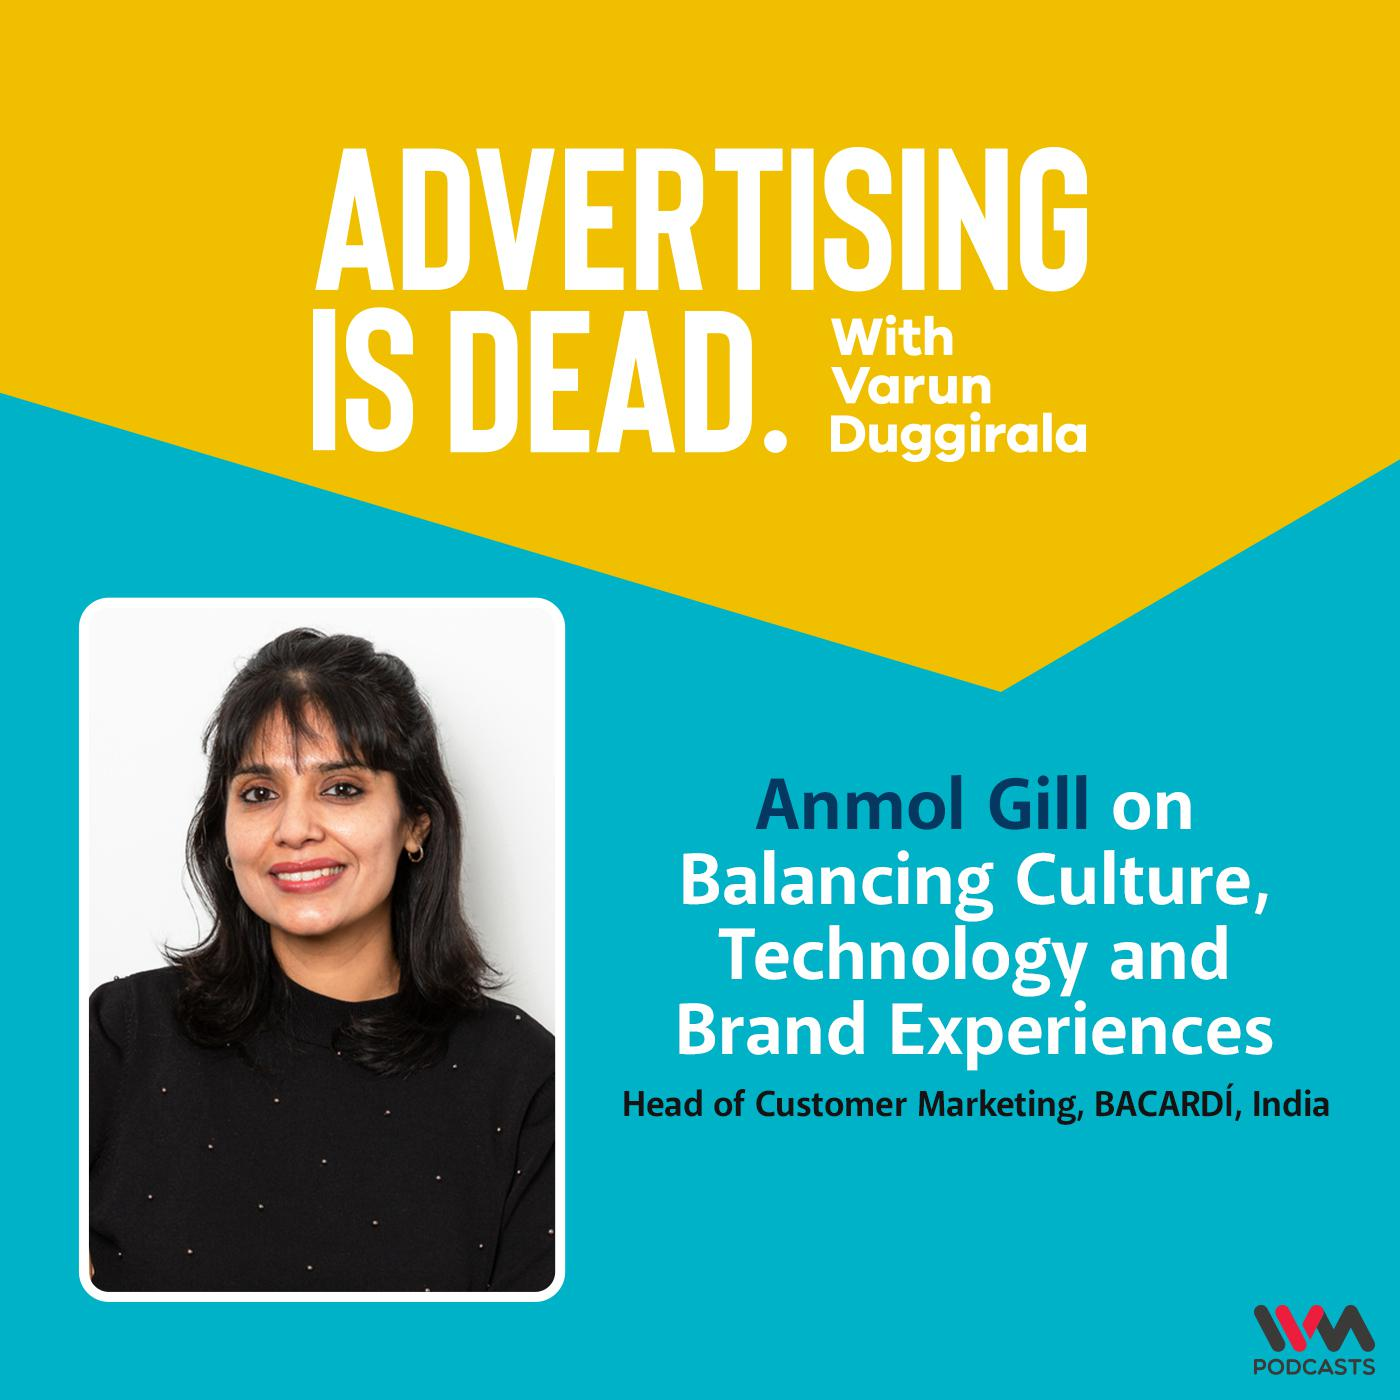 Anmol Gill on Balancing Culture, Technology and Brand Experiences